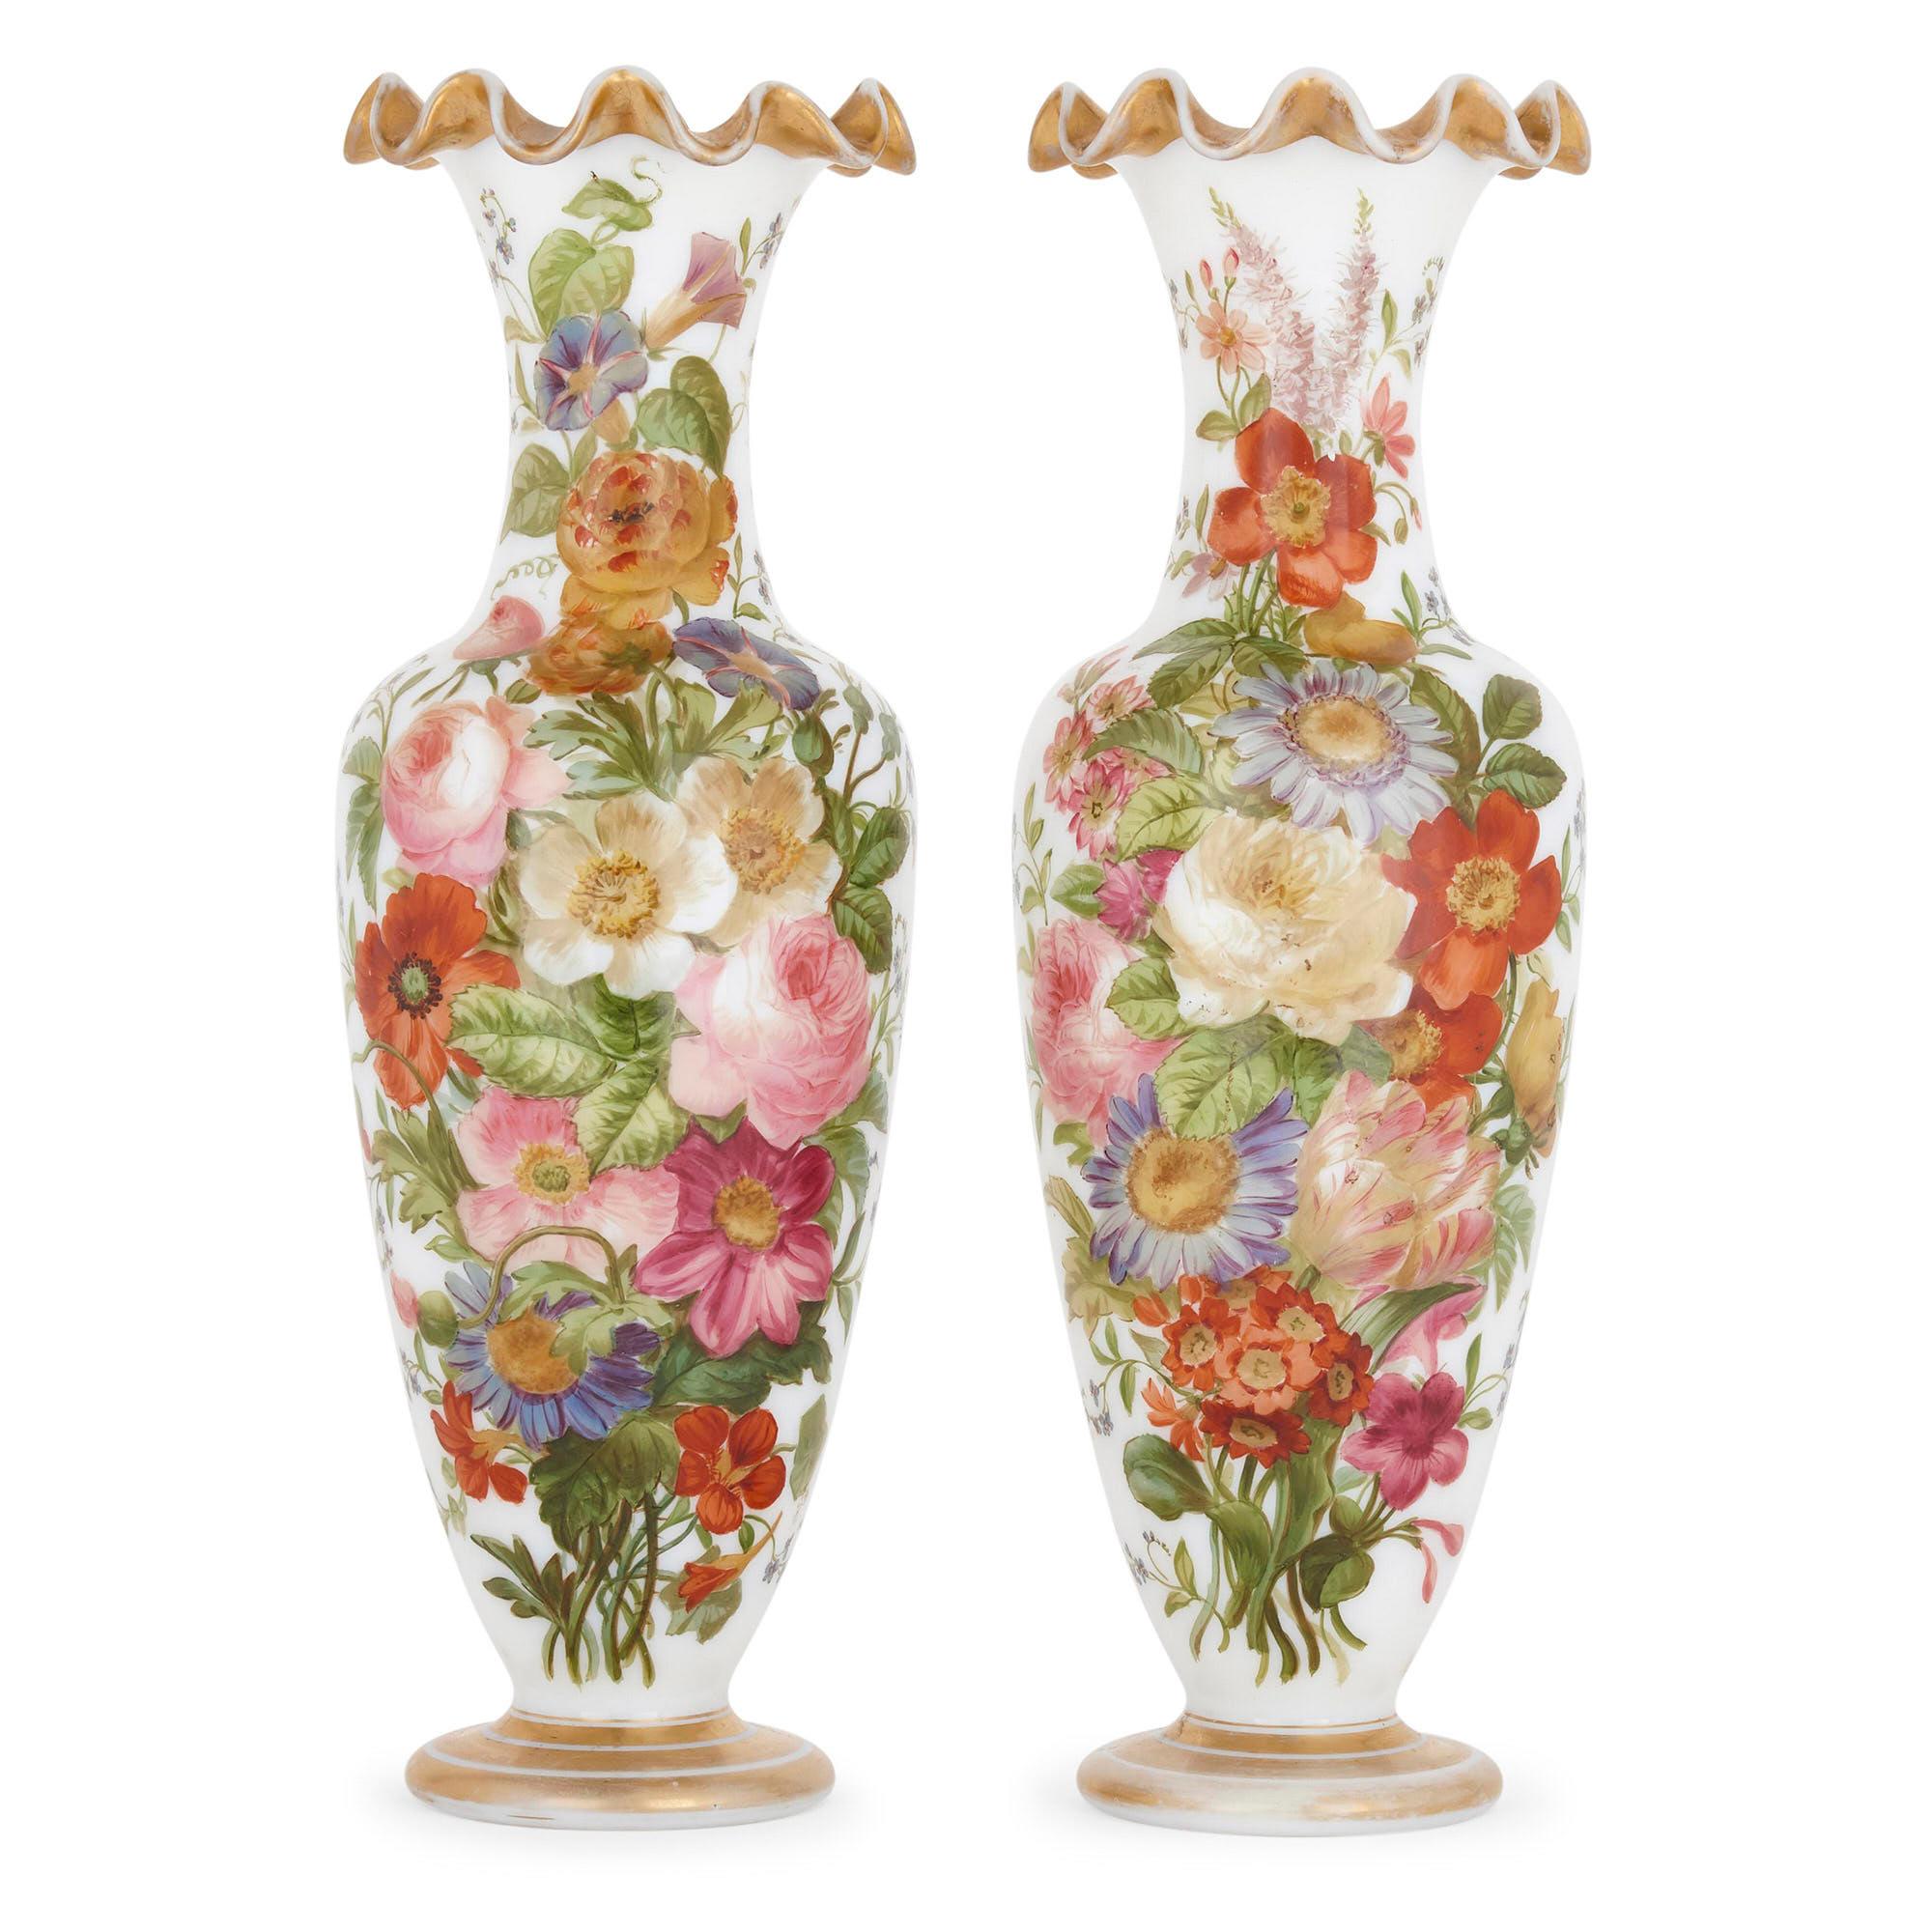 Pair of mid-19th century baccarat enameled glass vases
French, circa 1850
Measures: Height 35cm, diameter 12cm

Attributed to the famed designer and painter Jean François Robert (French, fl. 1843-1855), this pair of vases very finely show